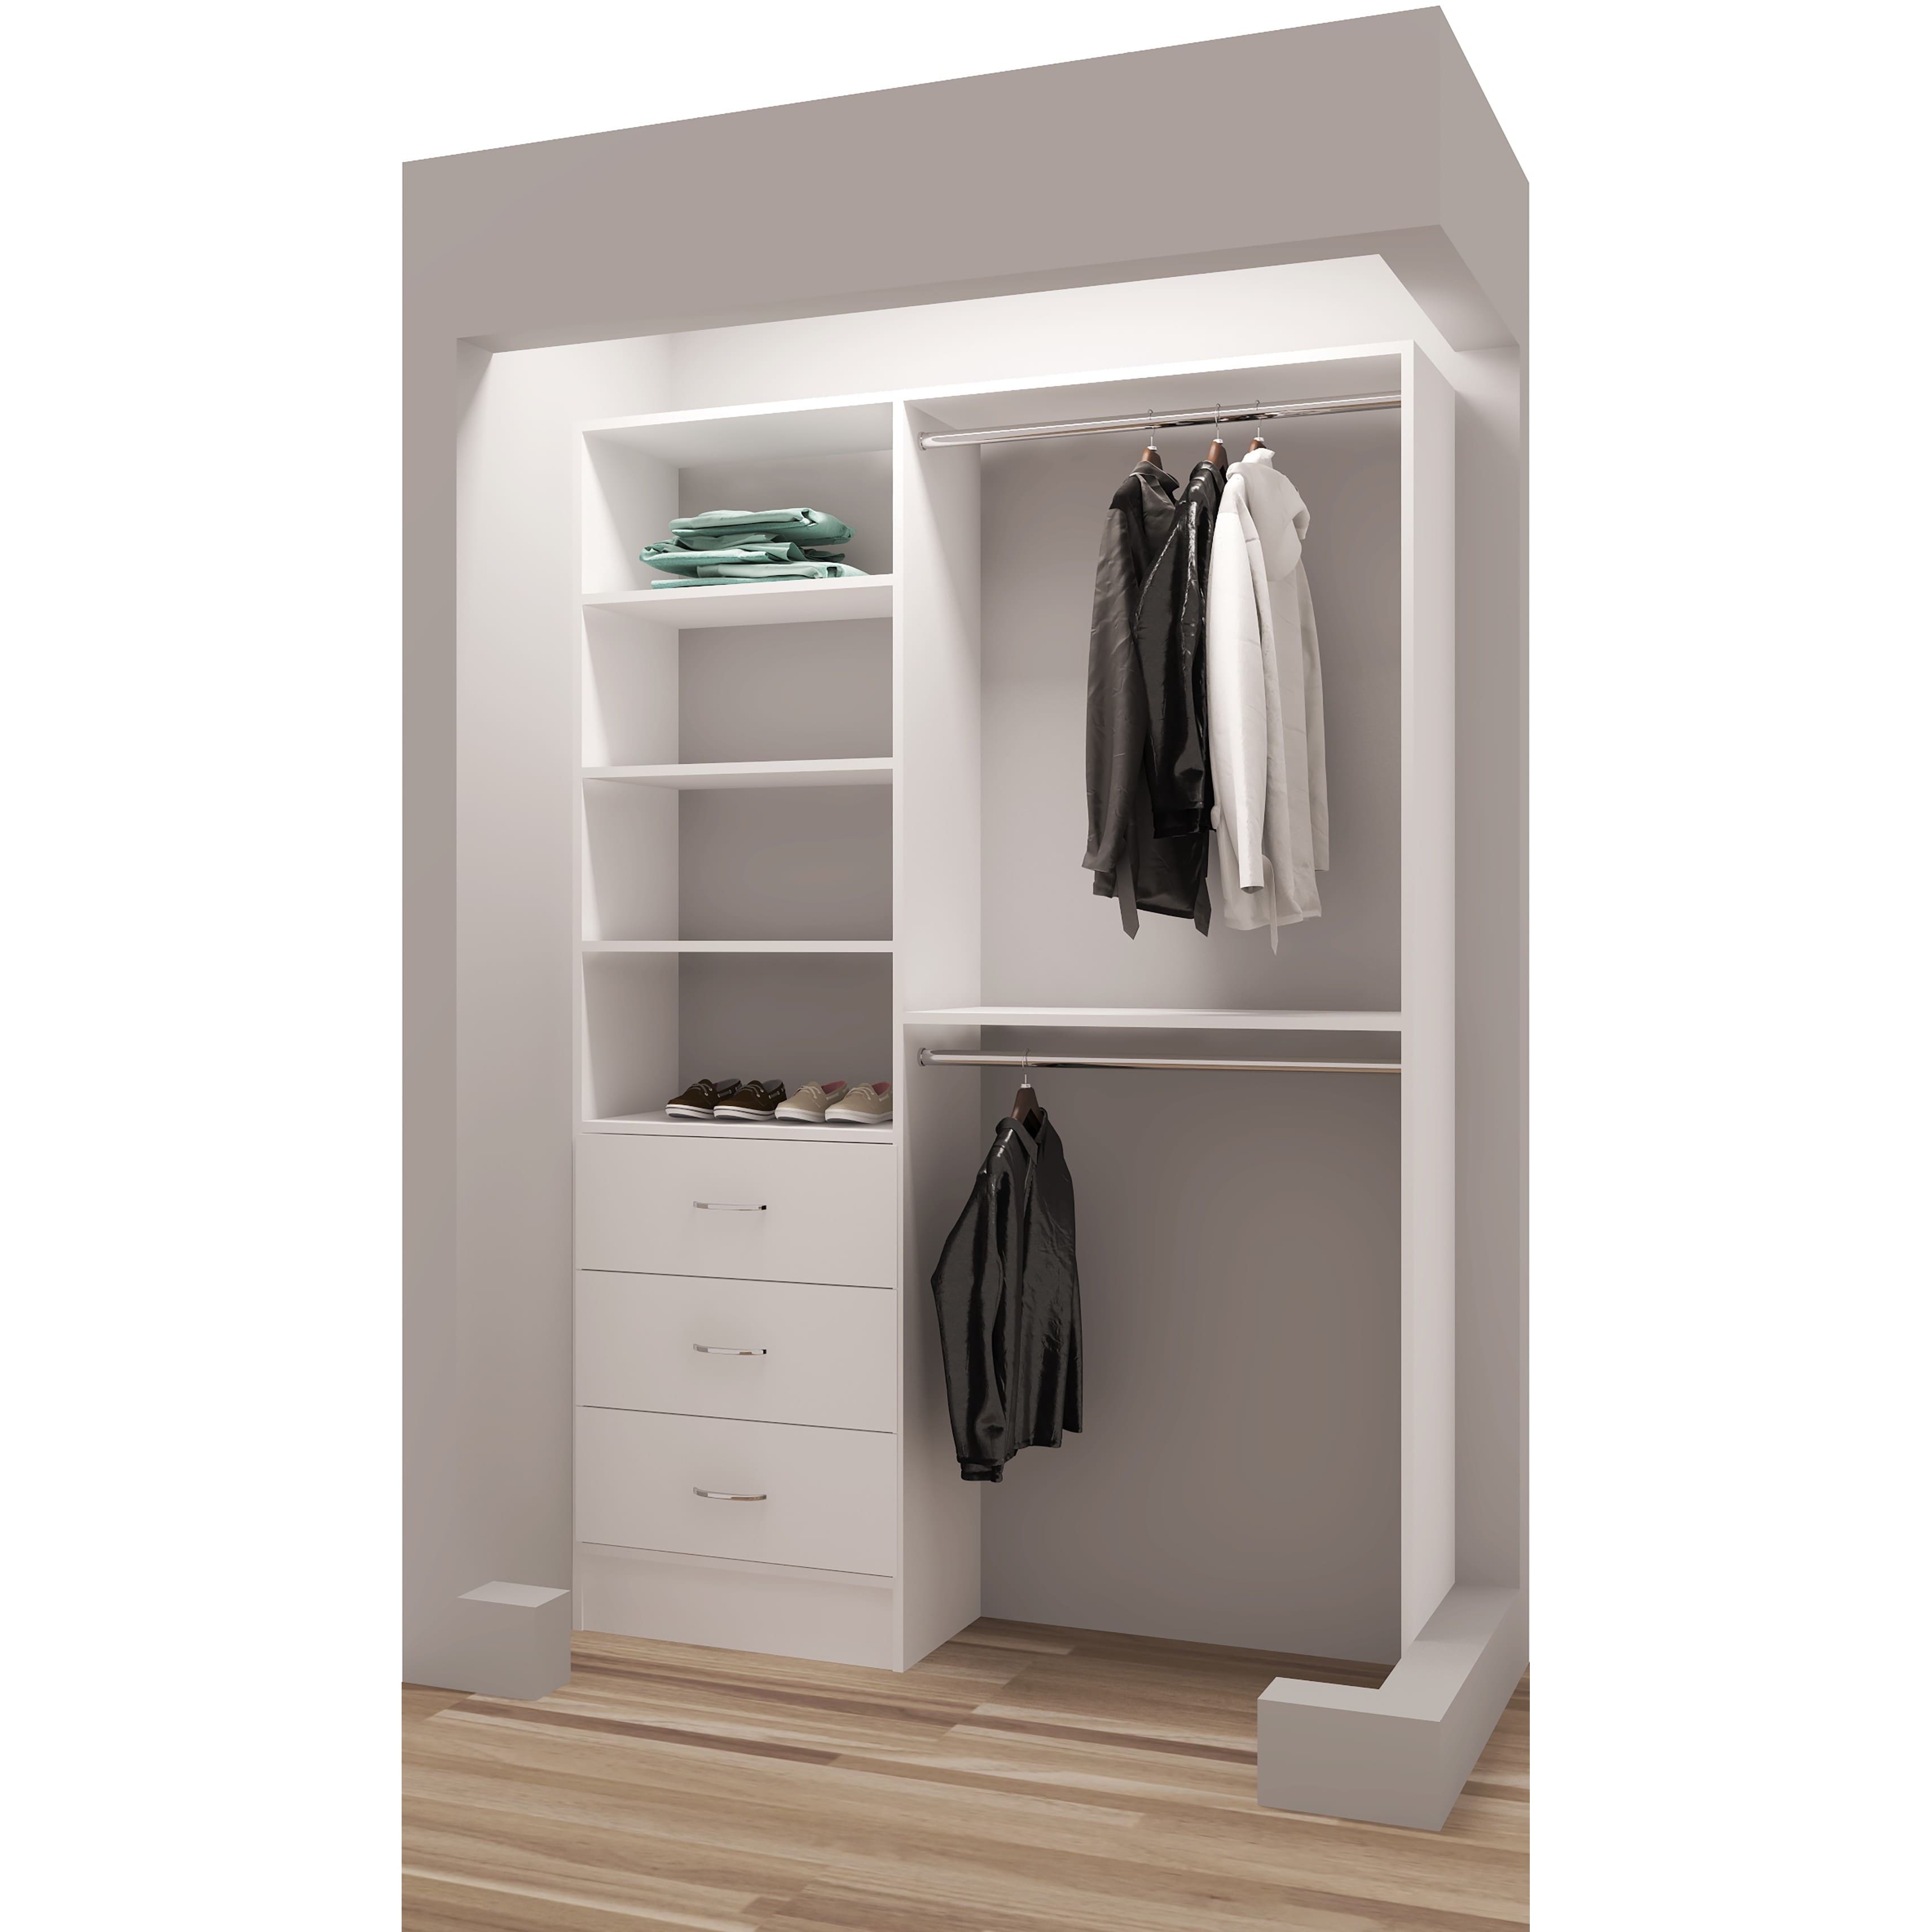 Buy Closet Organizers & Systems Online at Overstock | Our Best Storage